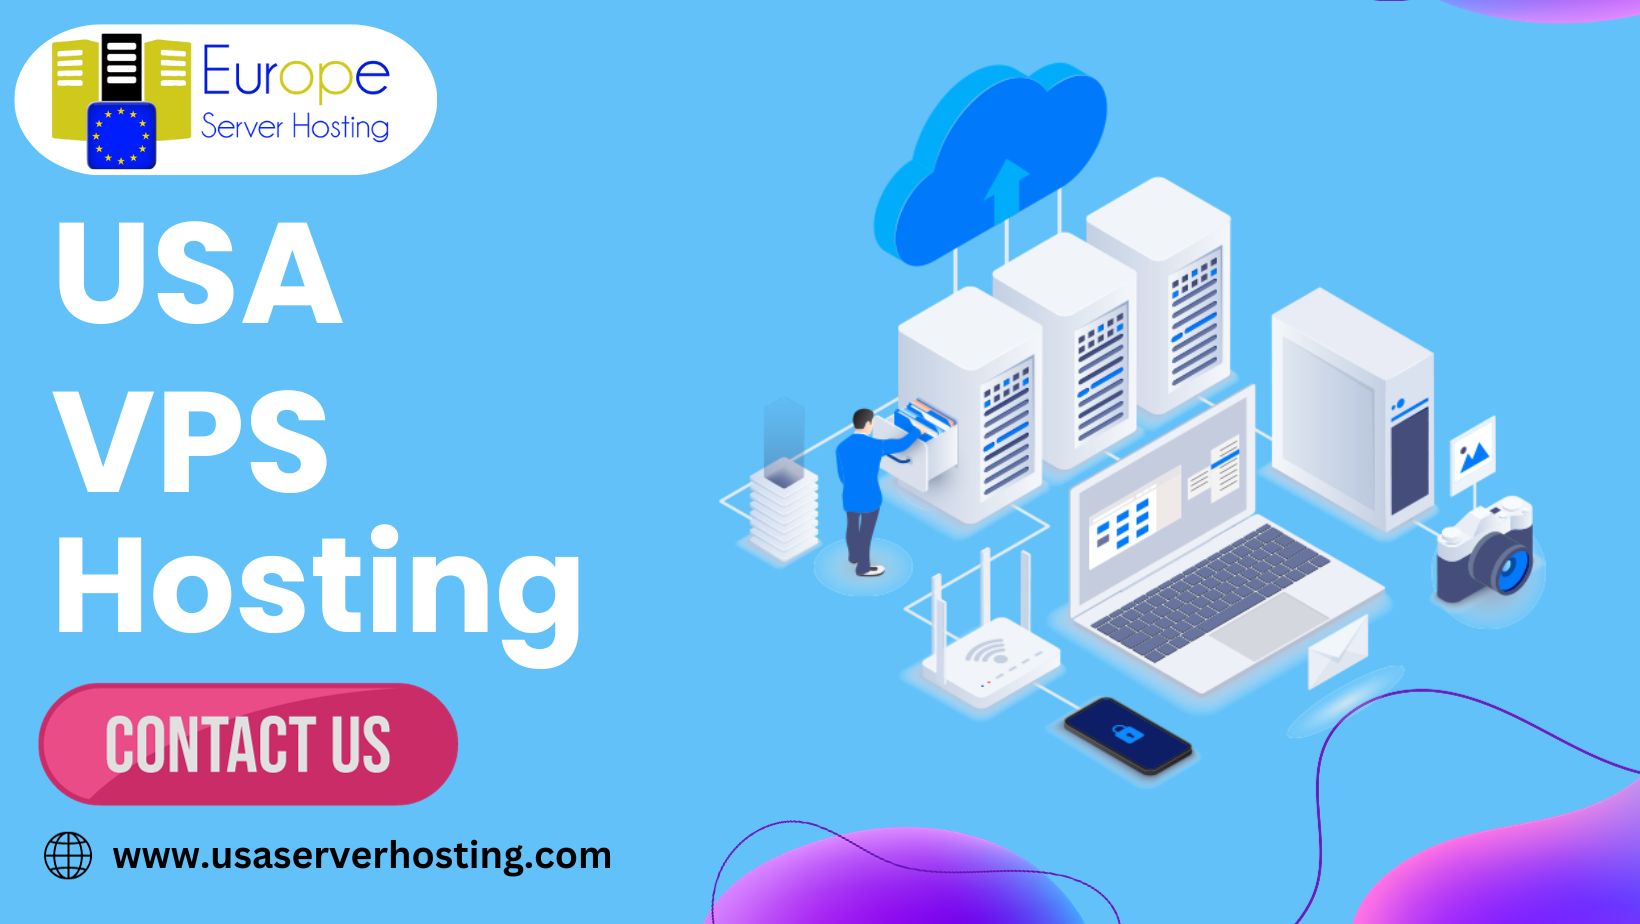 VPS hosting is a type of web hosting that utilizes virtualization technology to create isolated virtual servers on a single physical server. Each virtual server functions independently, allowing users to have more control, security, and customization options compared to shared hosting.